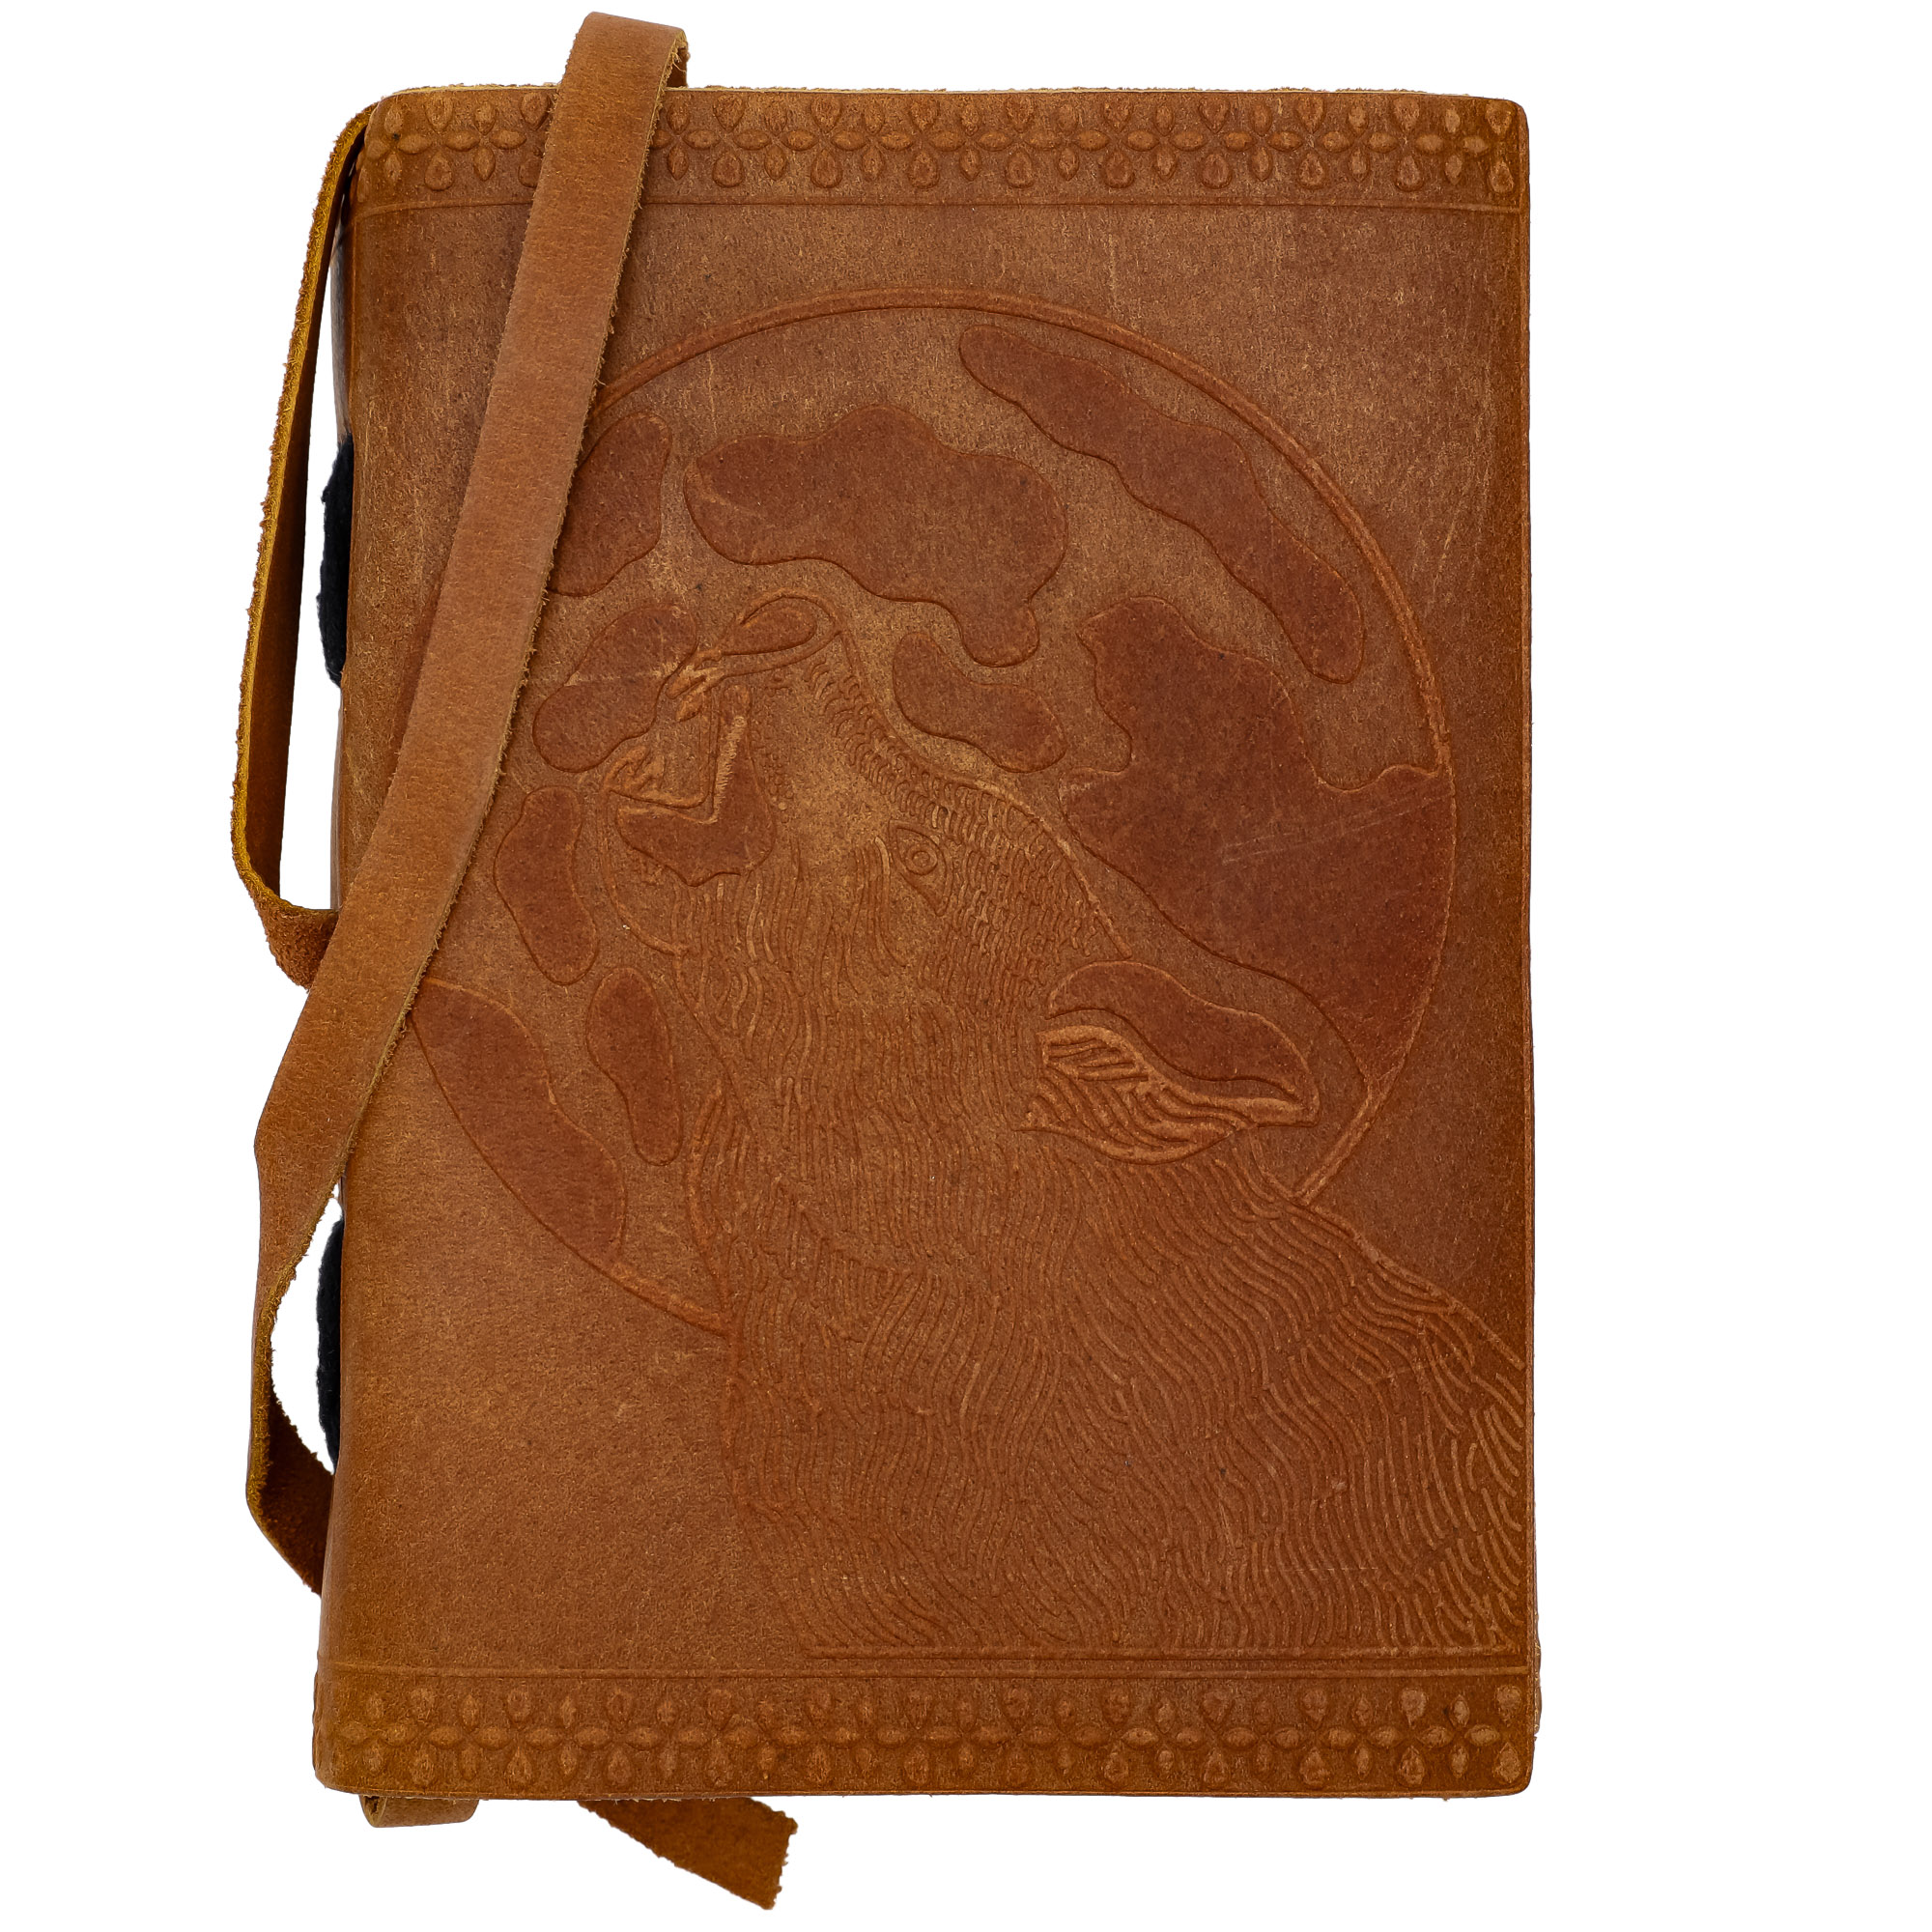 Moon Drunk Wolf & Moon Embossed Hand-Crafted Leather NOTEBOOK Sketchbook Diary Journal